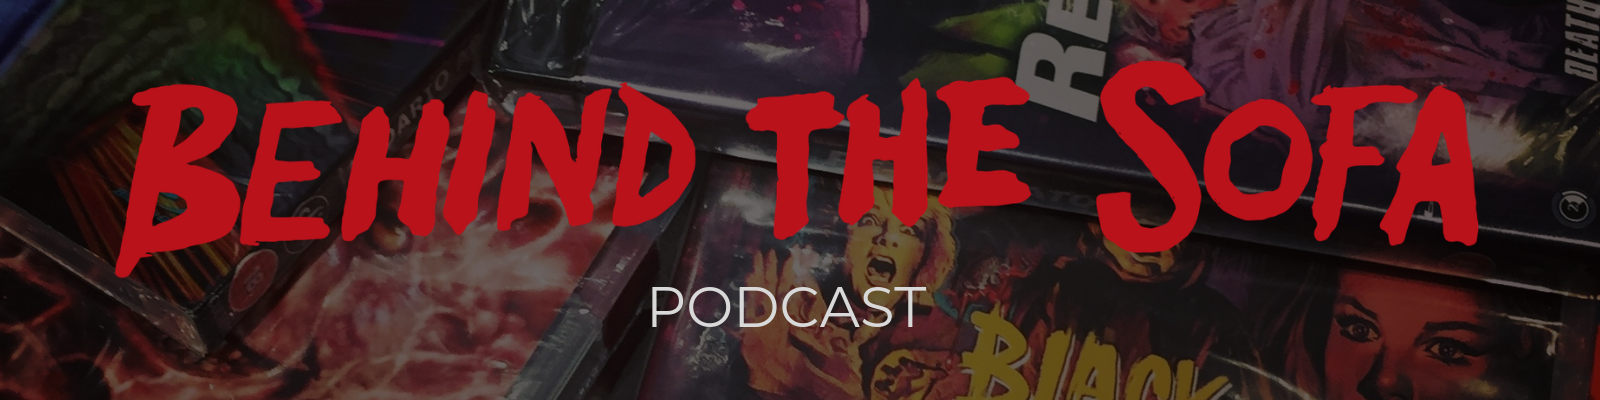 Behind the Sofa Podcast